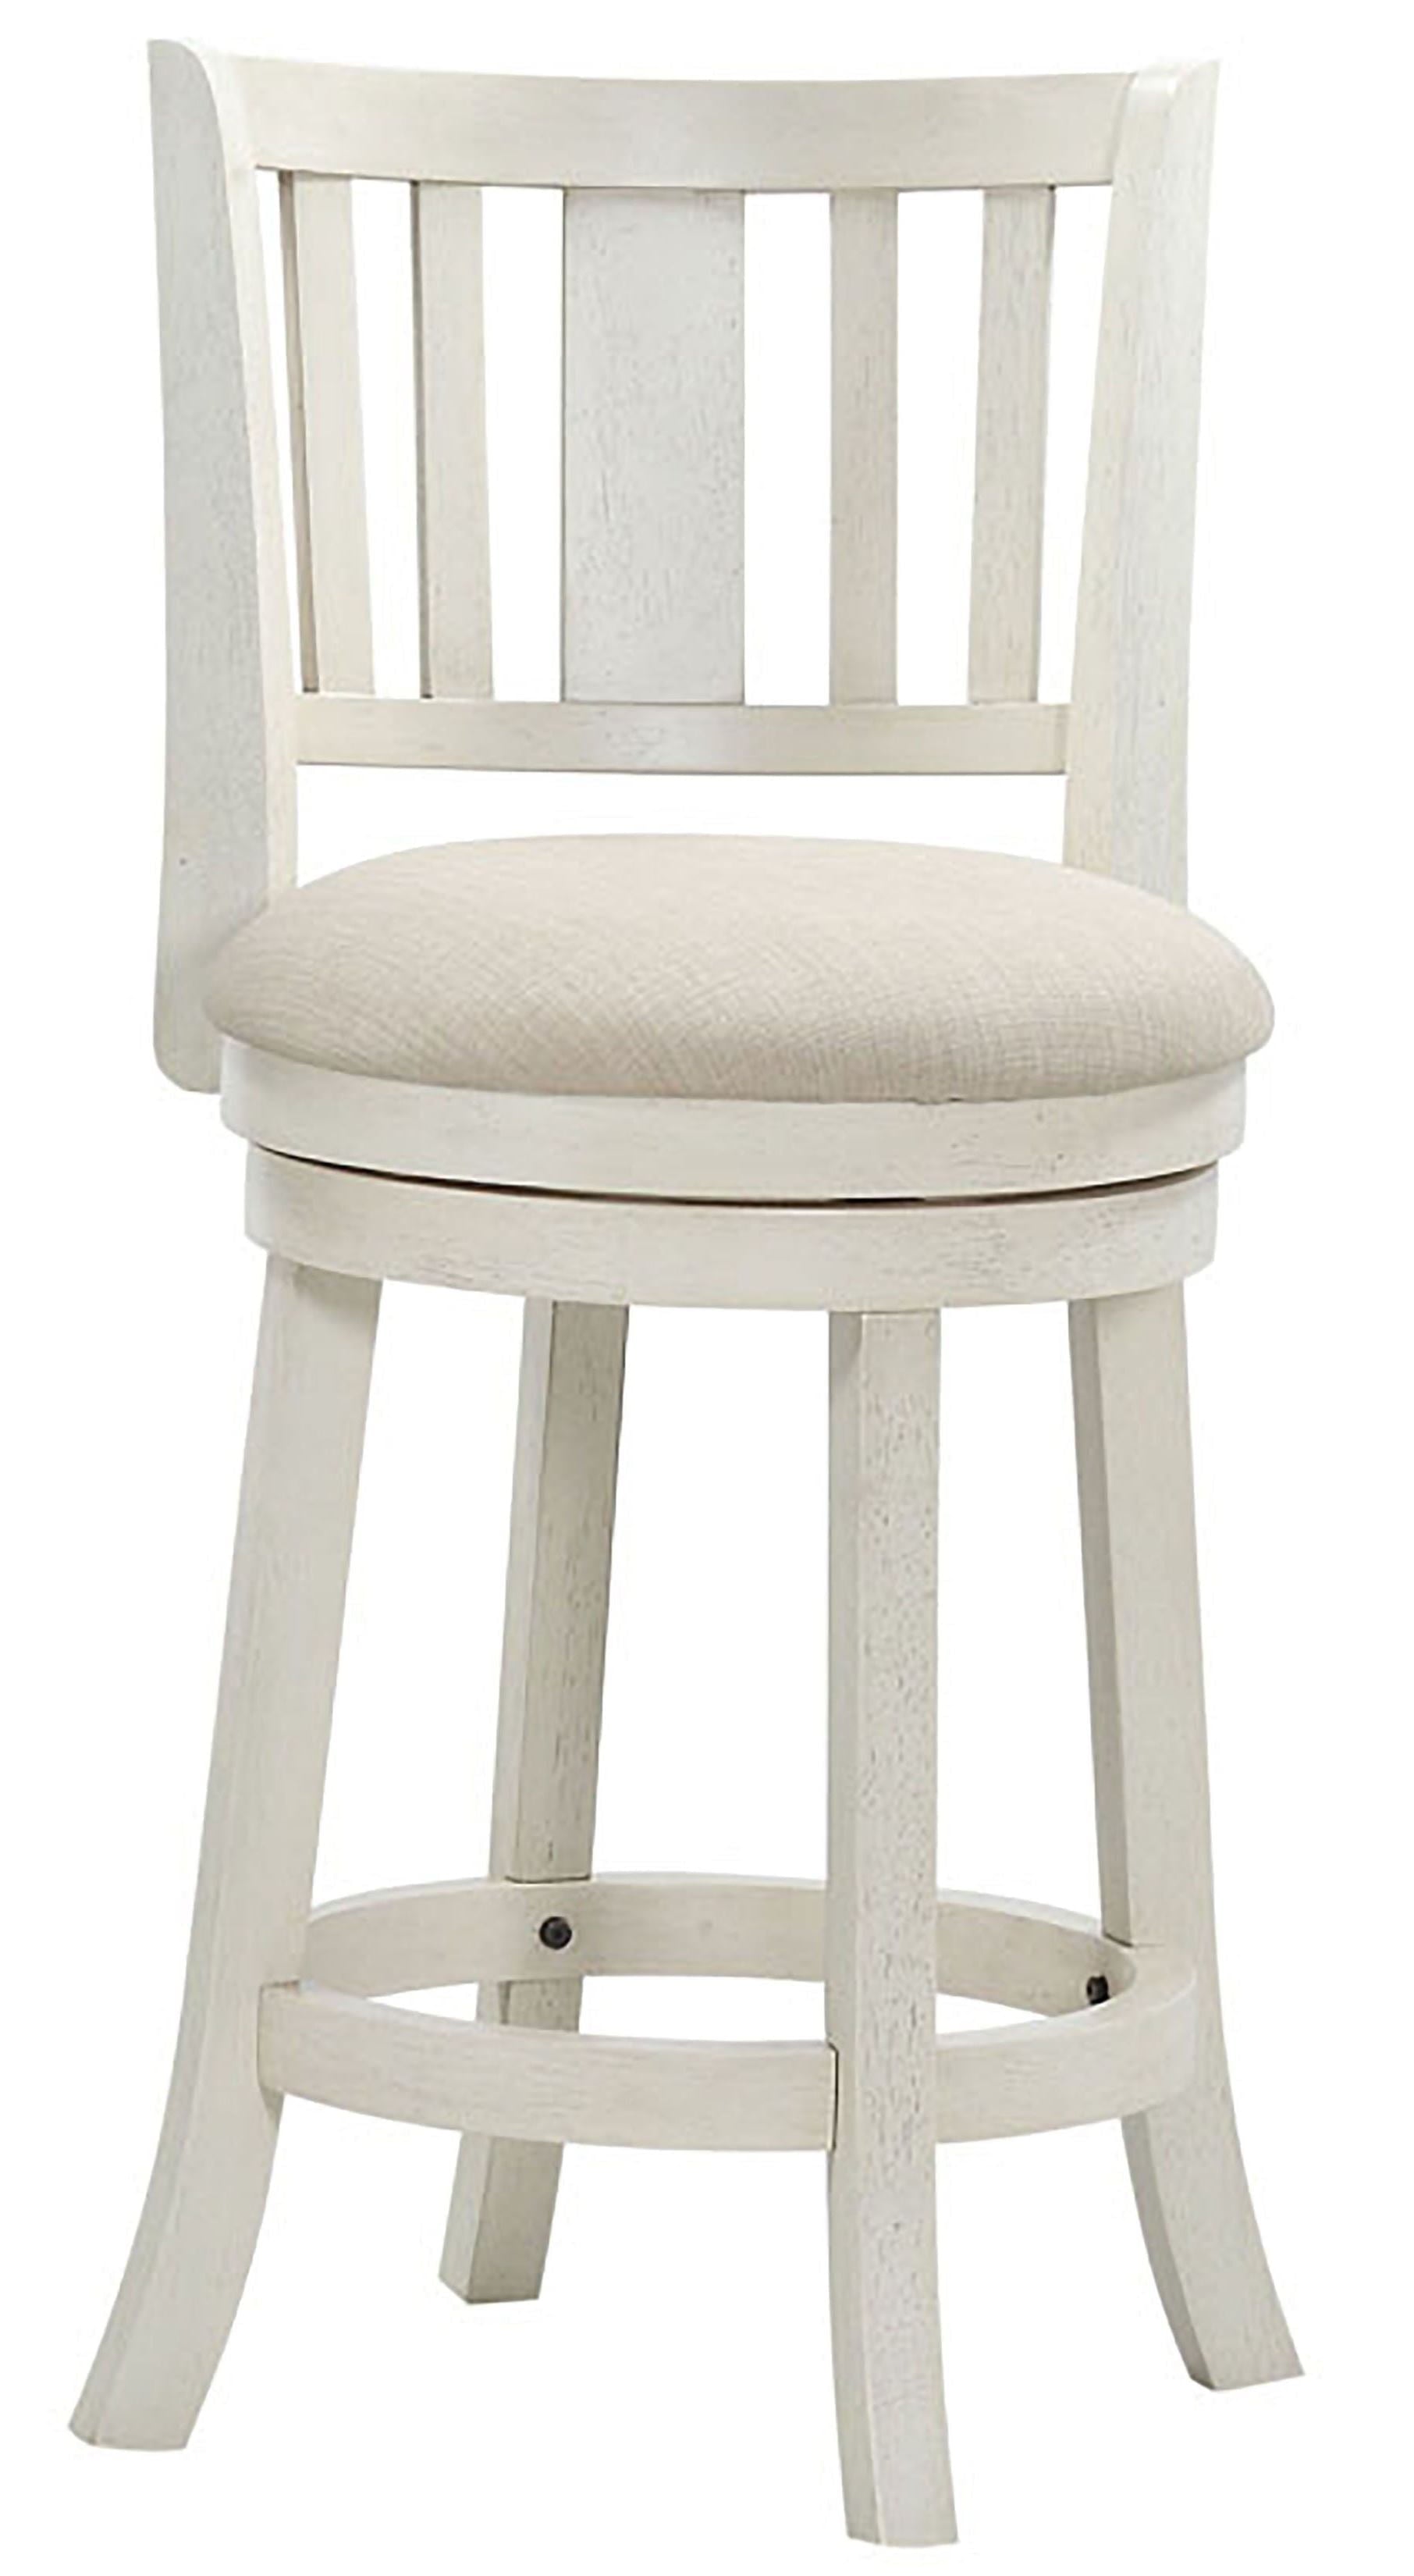 Antique White 24-Inch Swivel Counter Stool with Back By: Alabama Beds